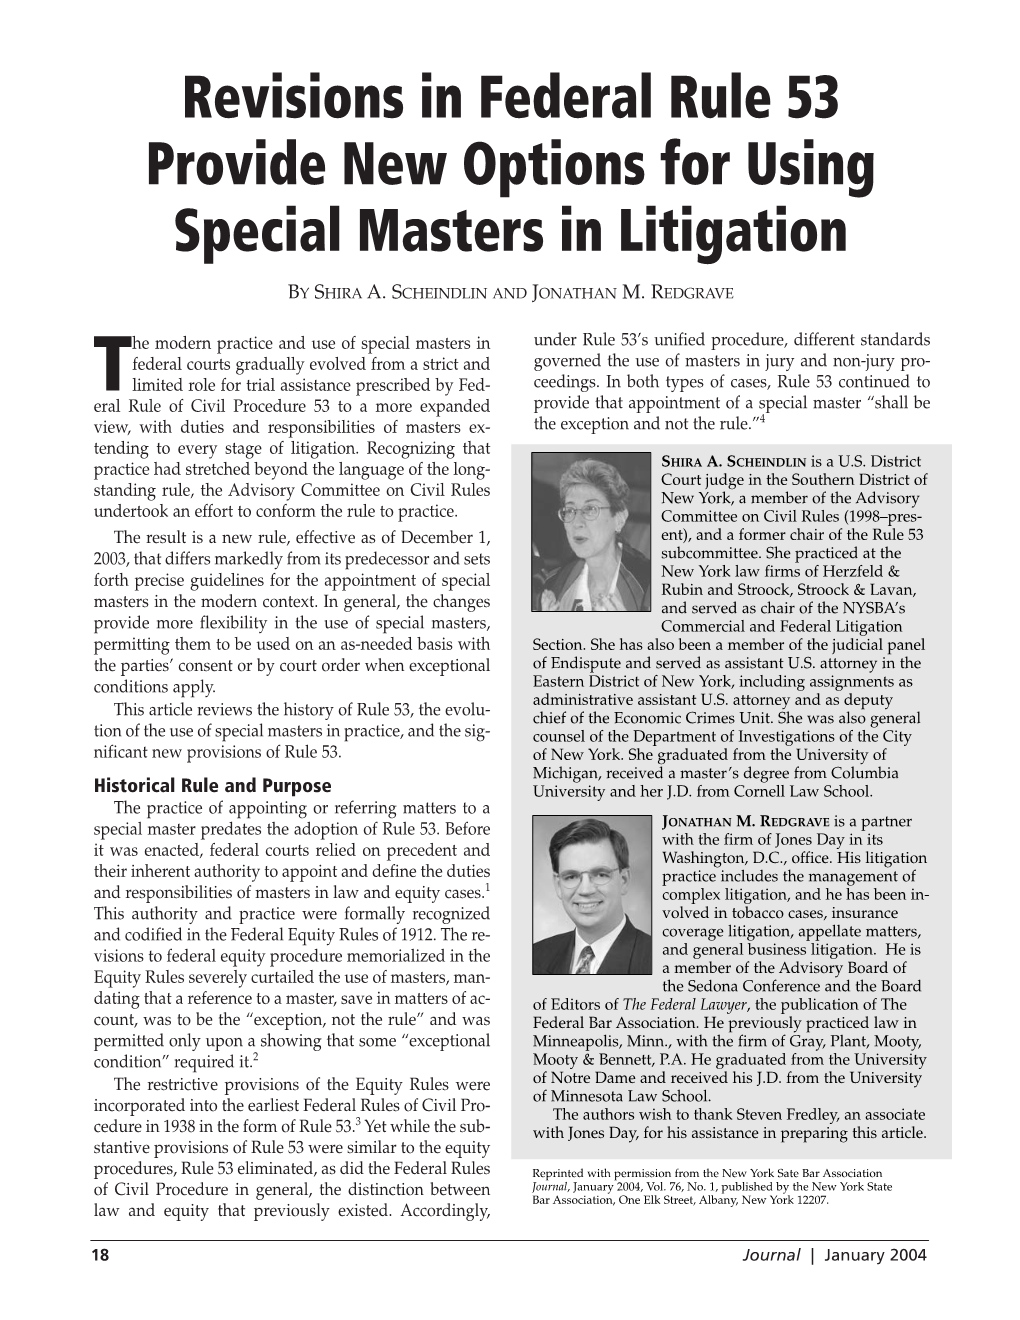 Revisions in Federal Rule 53 Provide New Options for Using Special Masters in Litigation